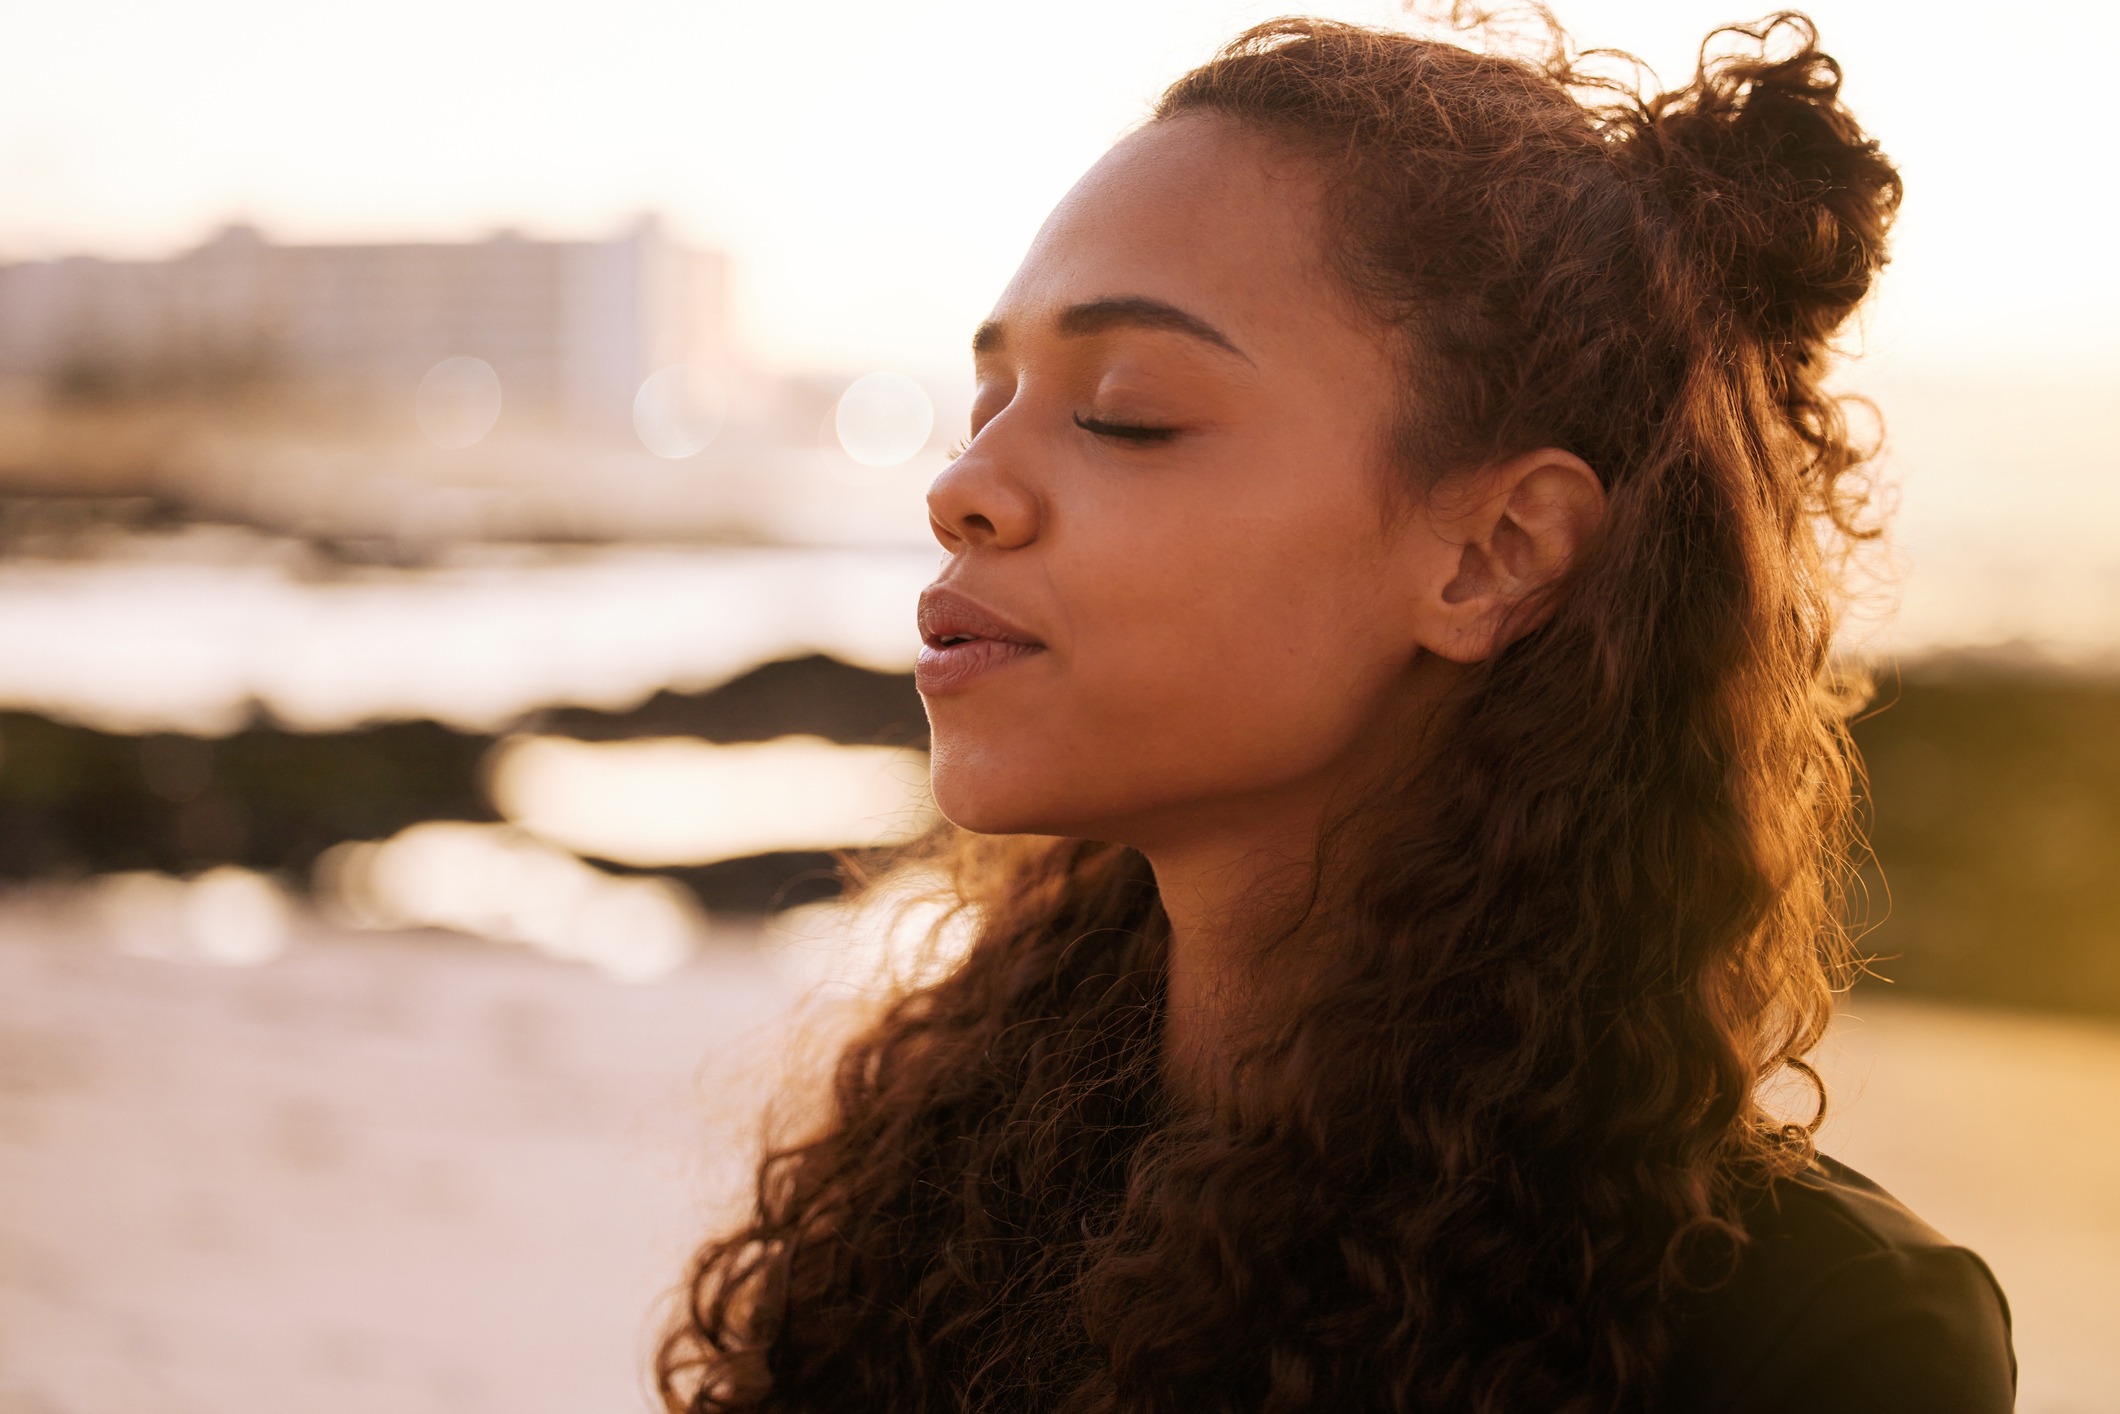 A black woman with loosely curled hair has her eyes closed and is exhaling through her mouth. It is sunset and the background is blurred.